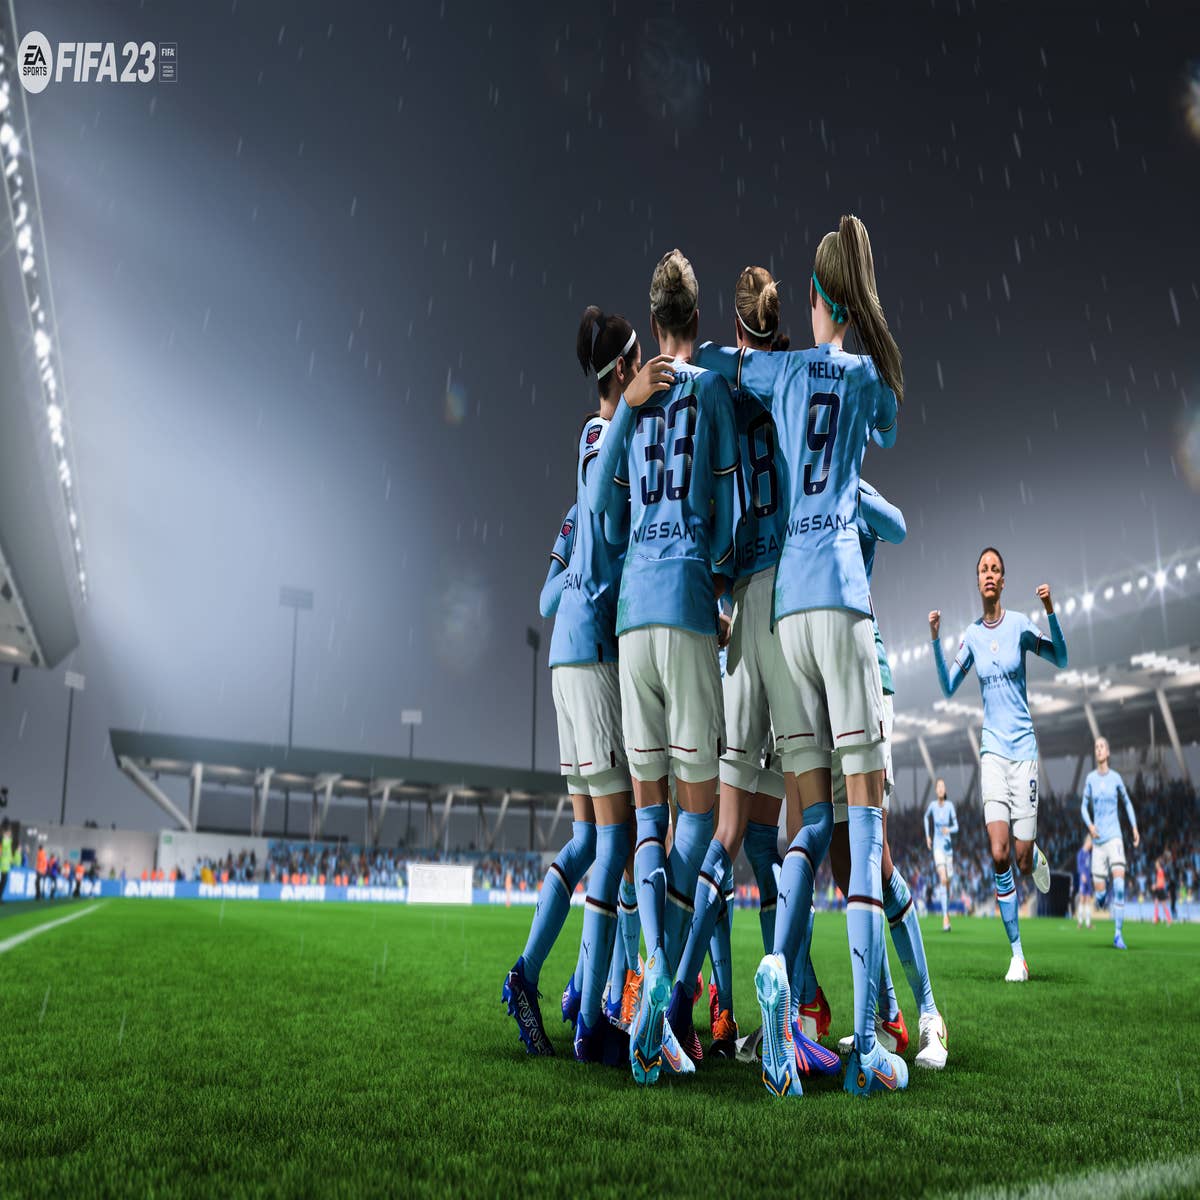 FIFA 23 - PS4 PRO GAMEPLAY 2023 